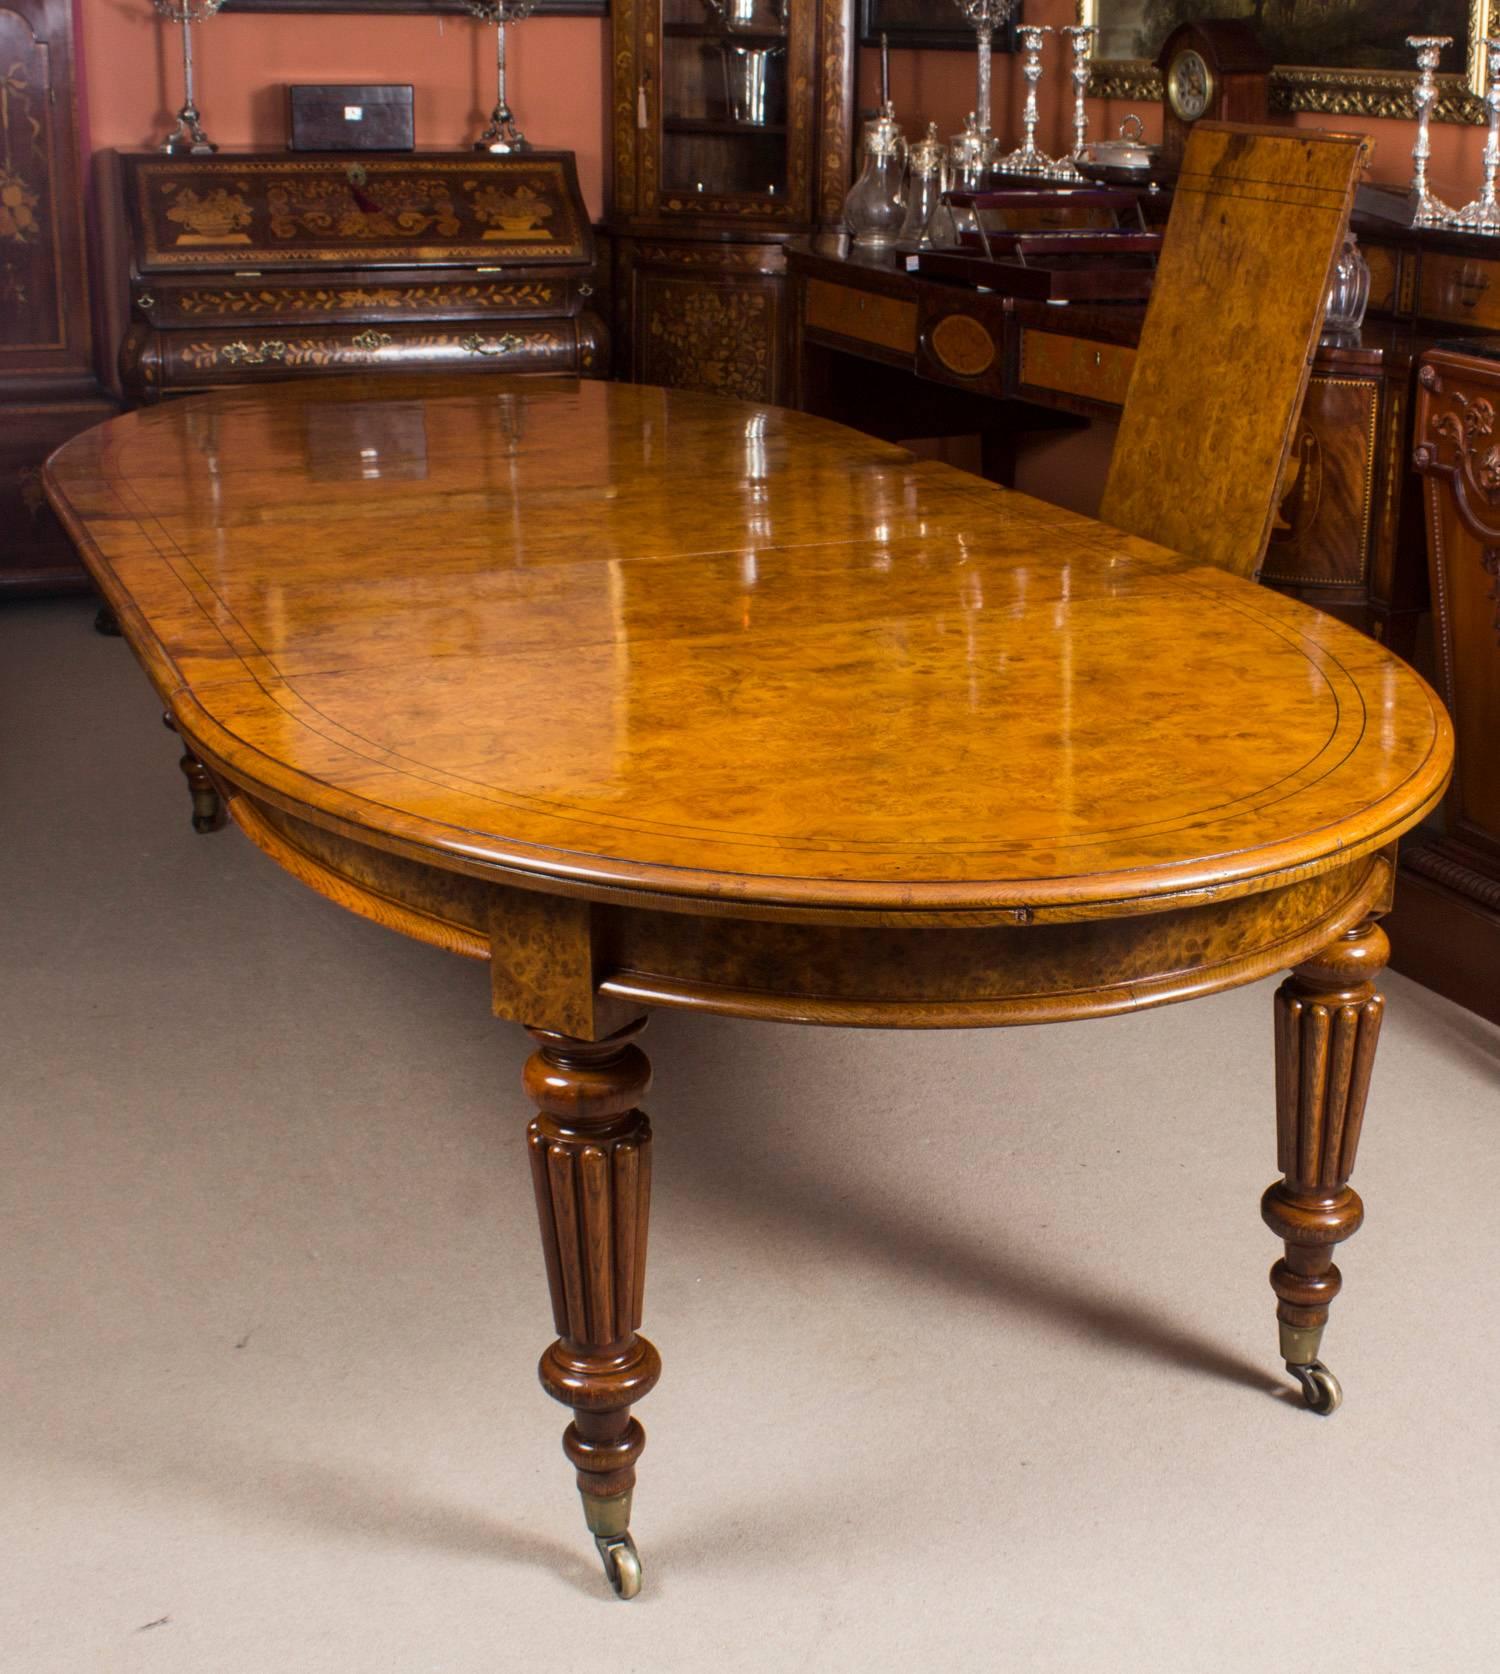 Damask Antique Pollard Oak Victorian Extending Dining Table and 12 Chairs, 19th Century